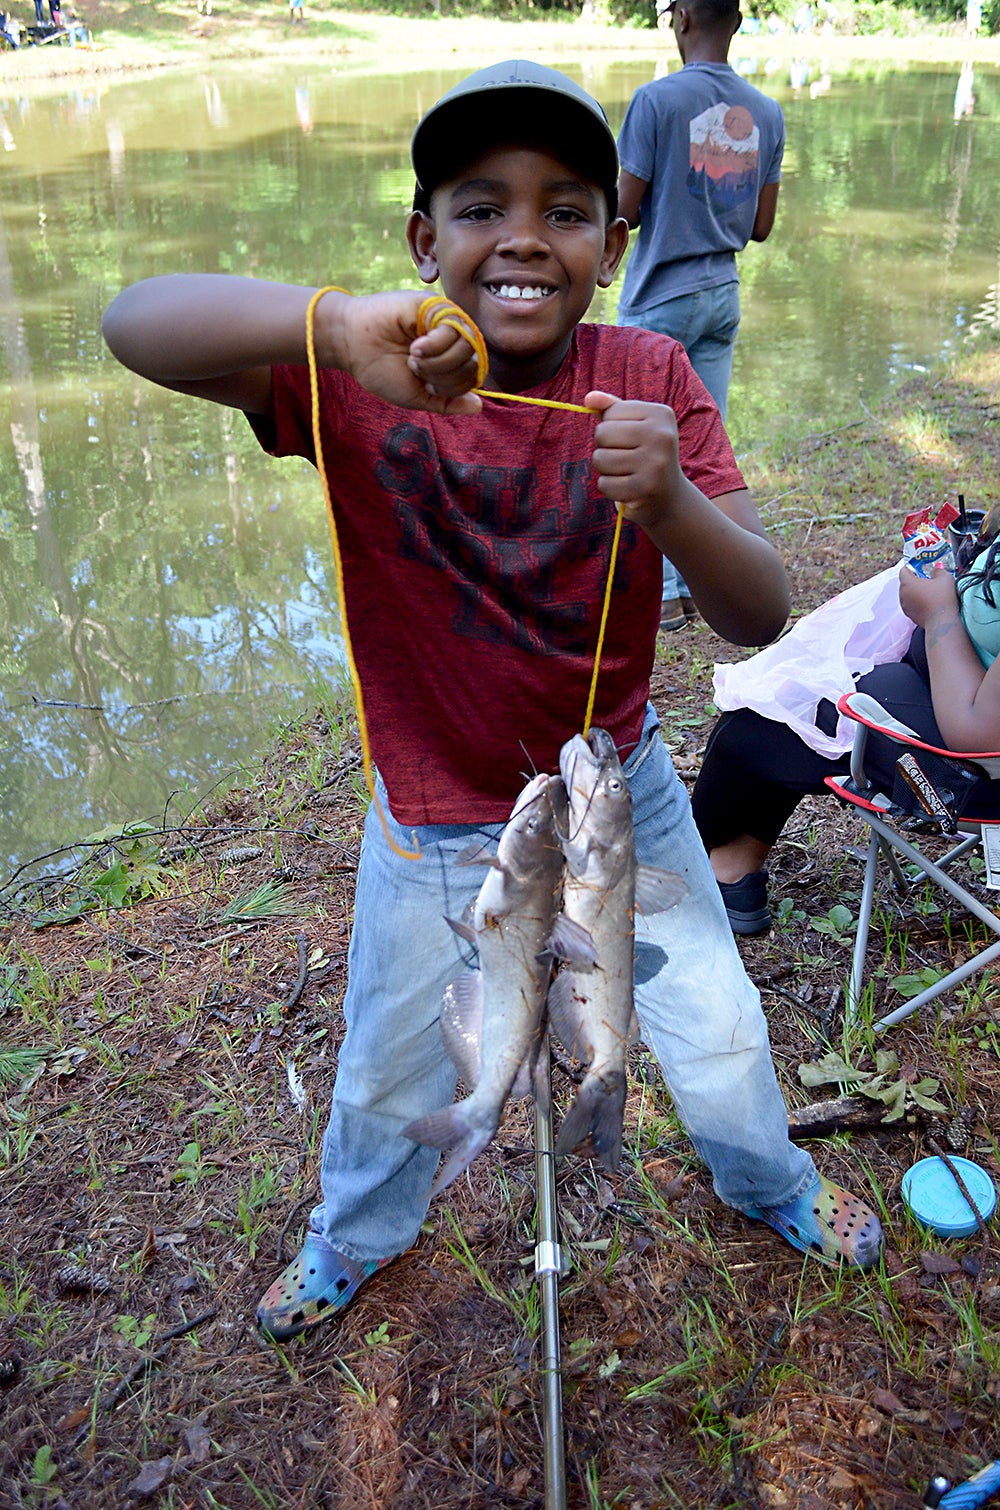 Good fishing, good times at Kid's Fishing Day - The Troy Messenger